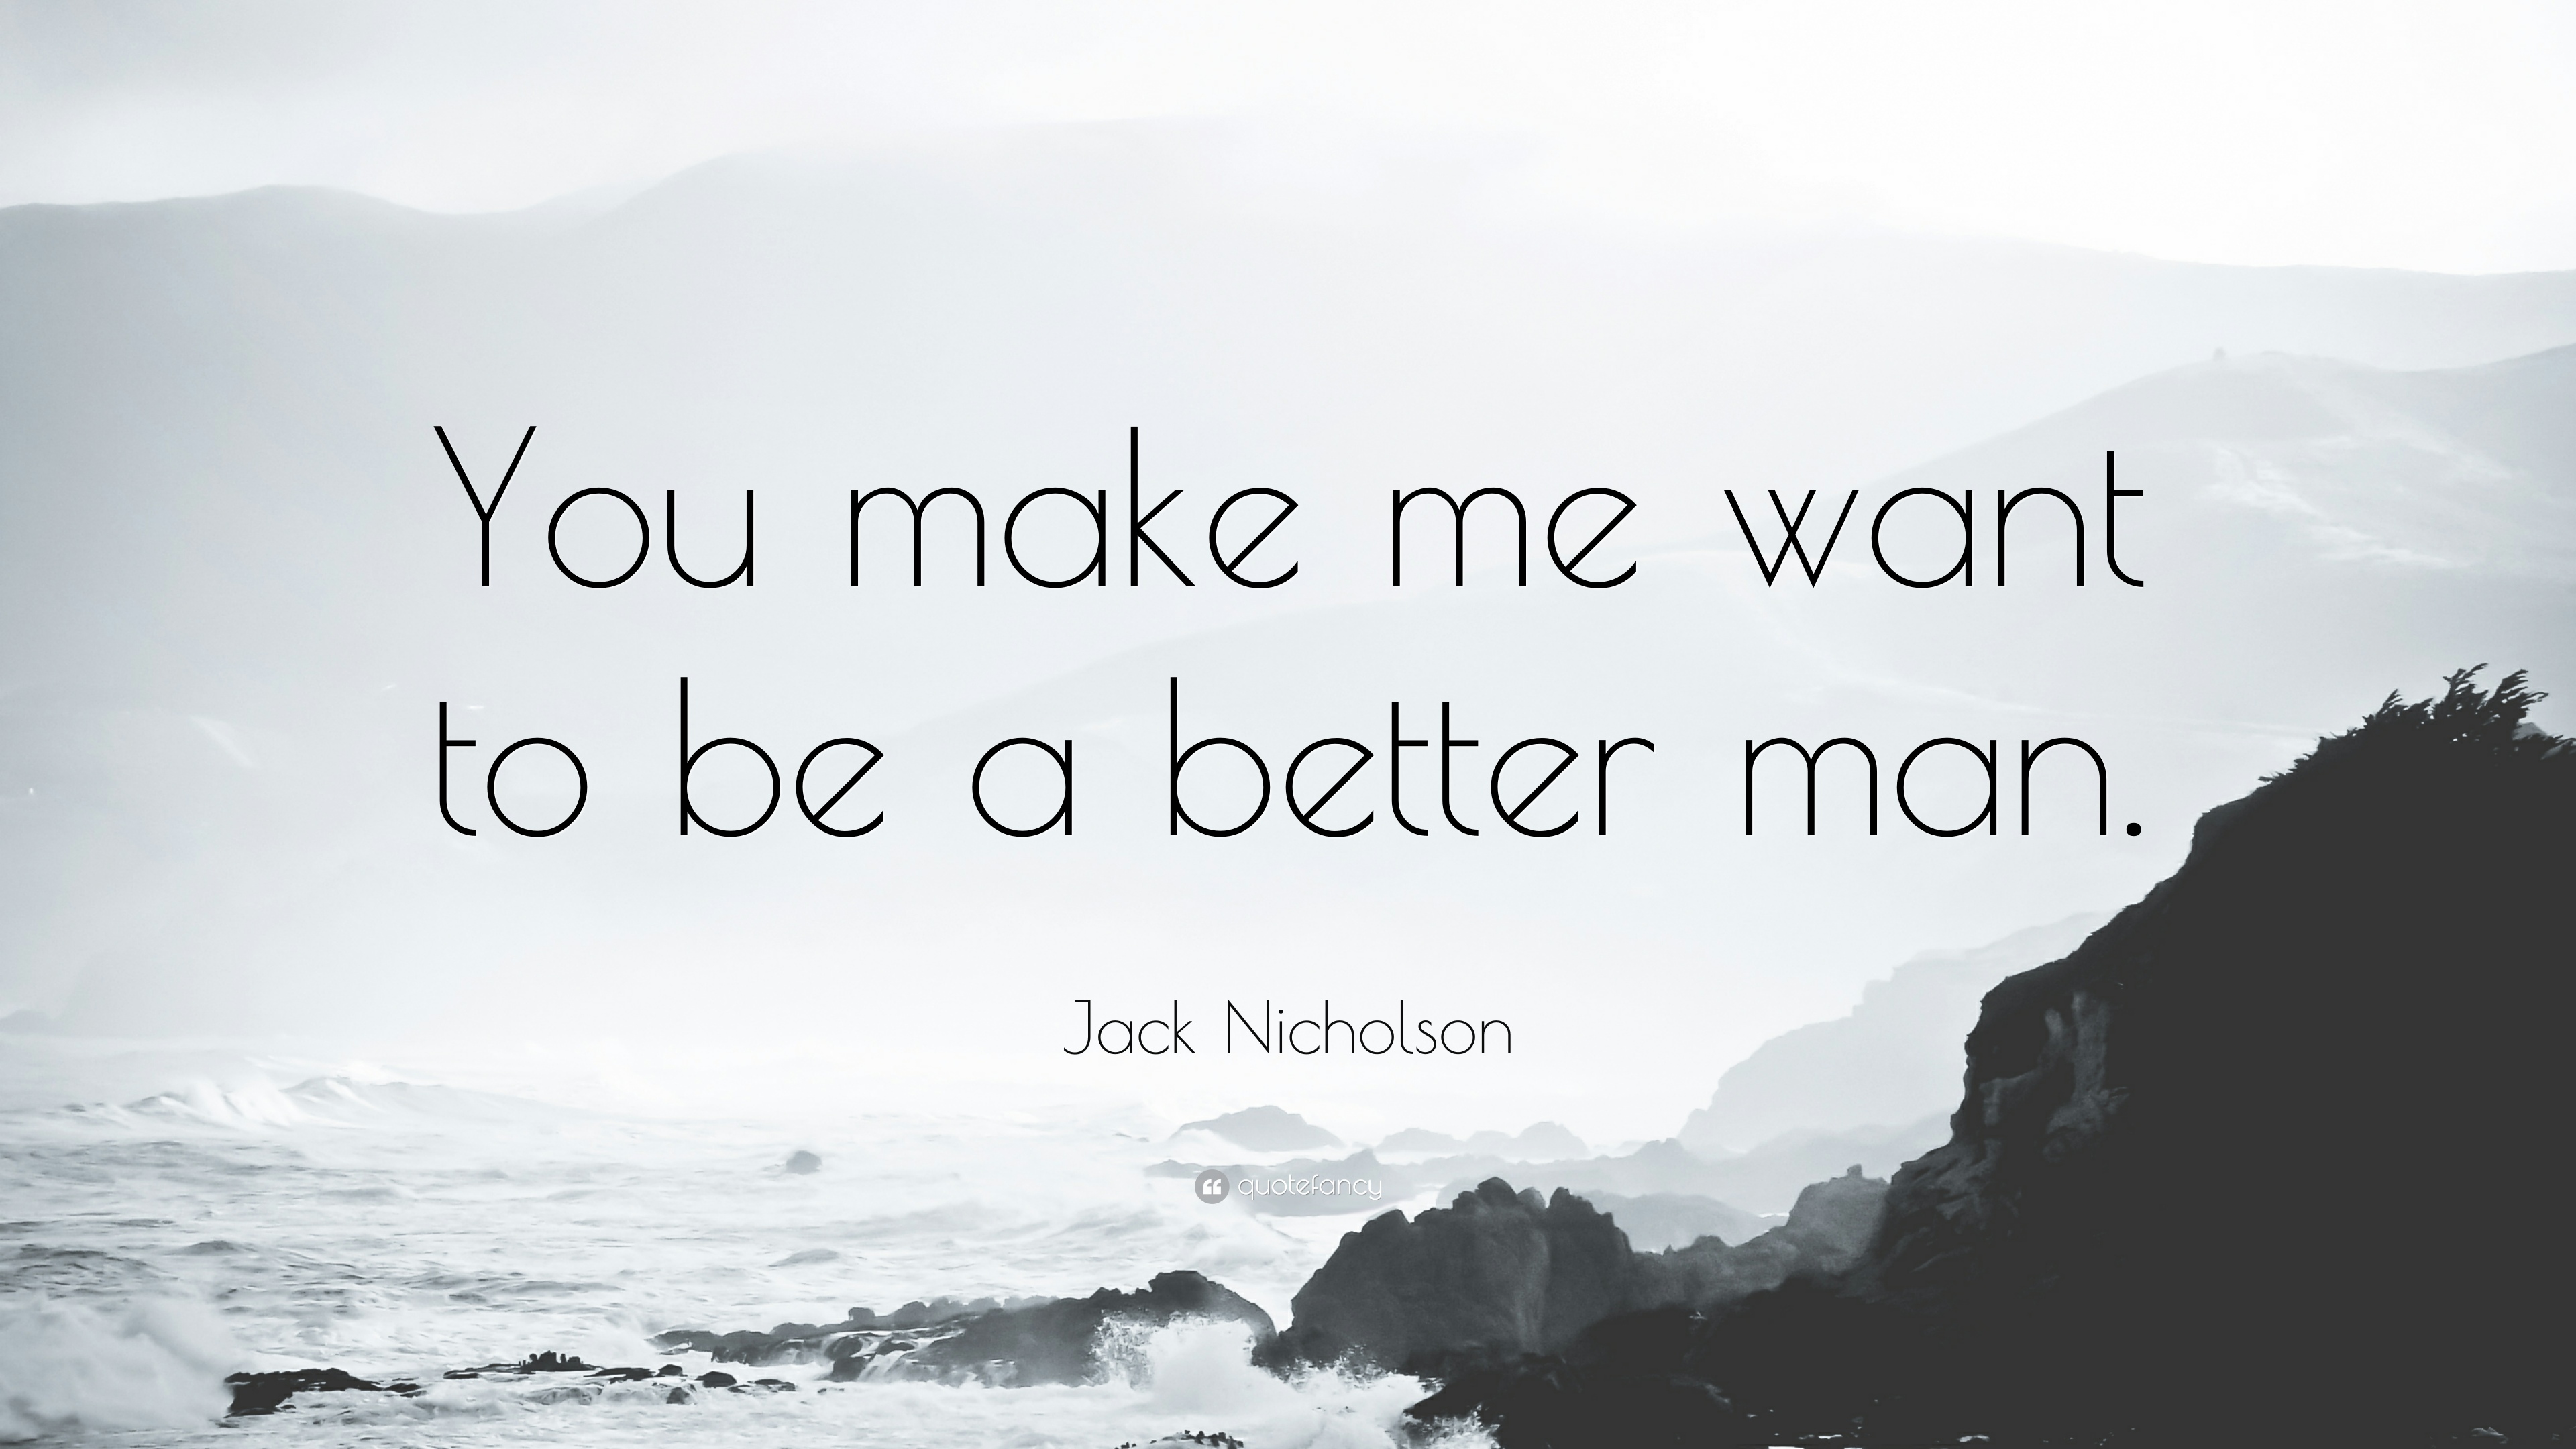 Jack Nicholson Quote: “You make me want to be a better man.” (9 ...